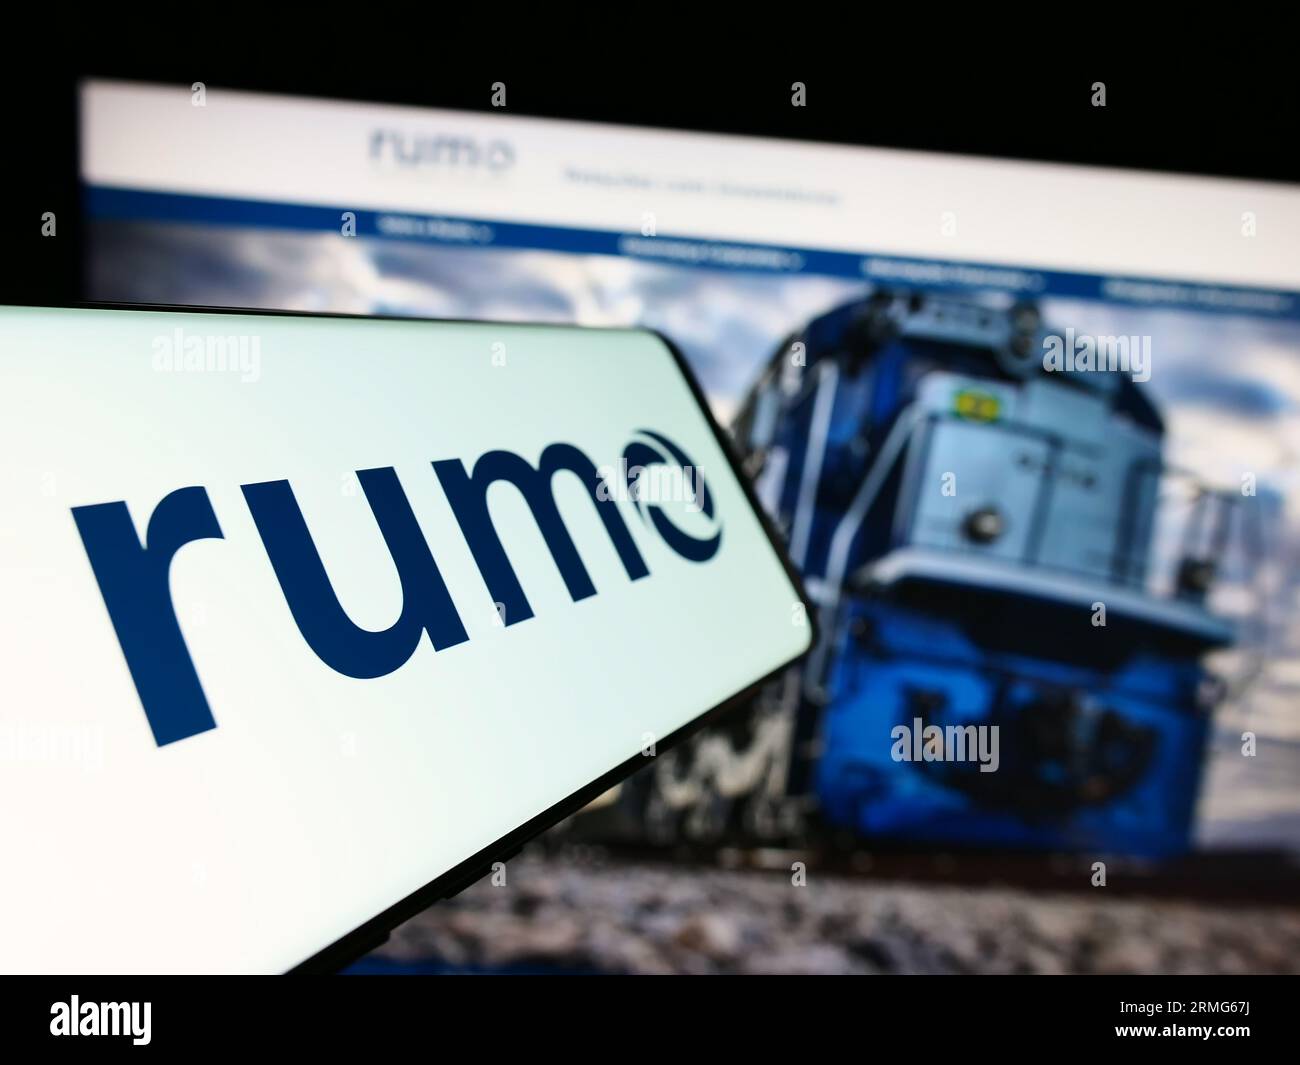 Cellphone with logo of Brazilian logistics company Rumo S.A. on screen in front of business website. Focus on center-left of phone display. Stock Photo